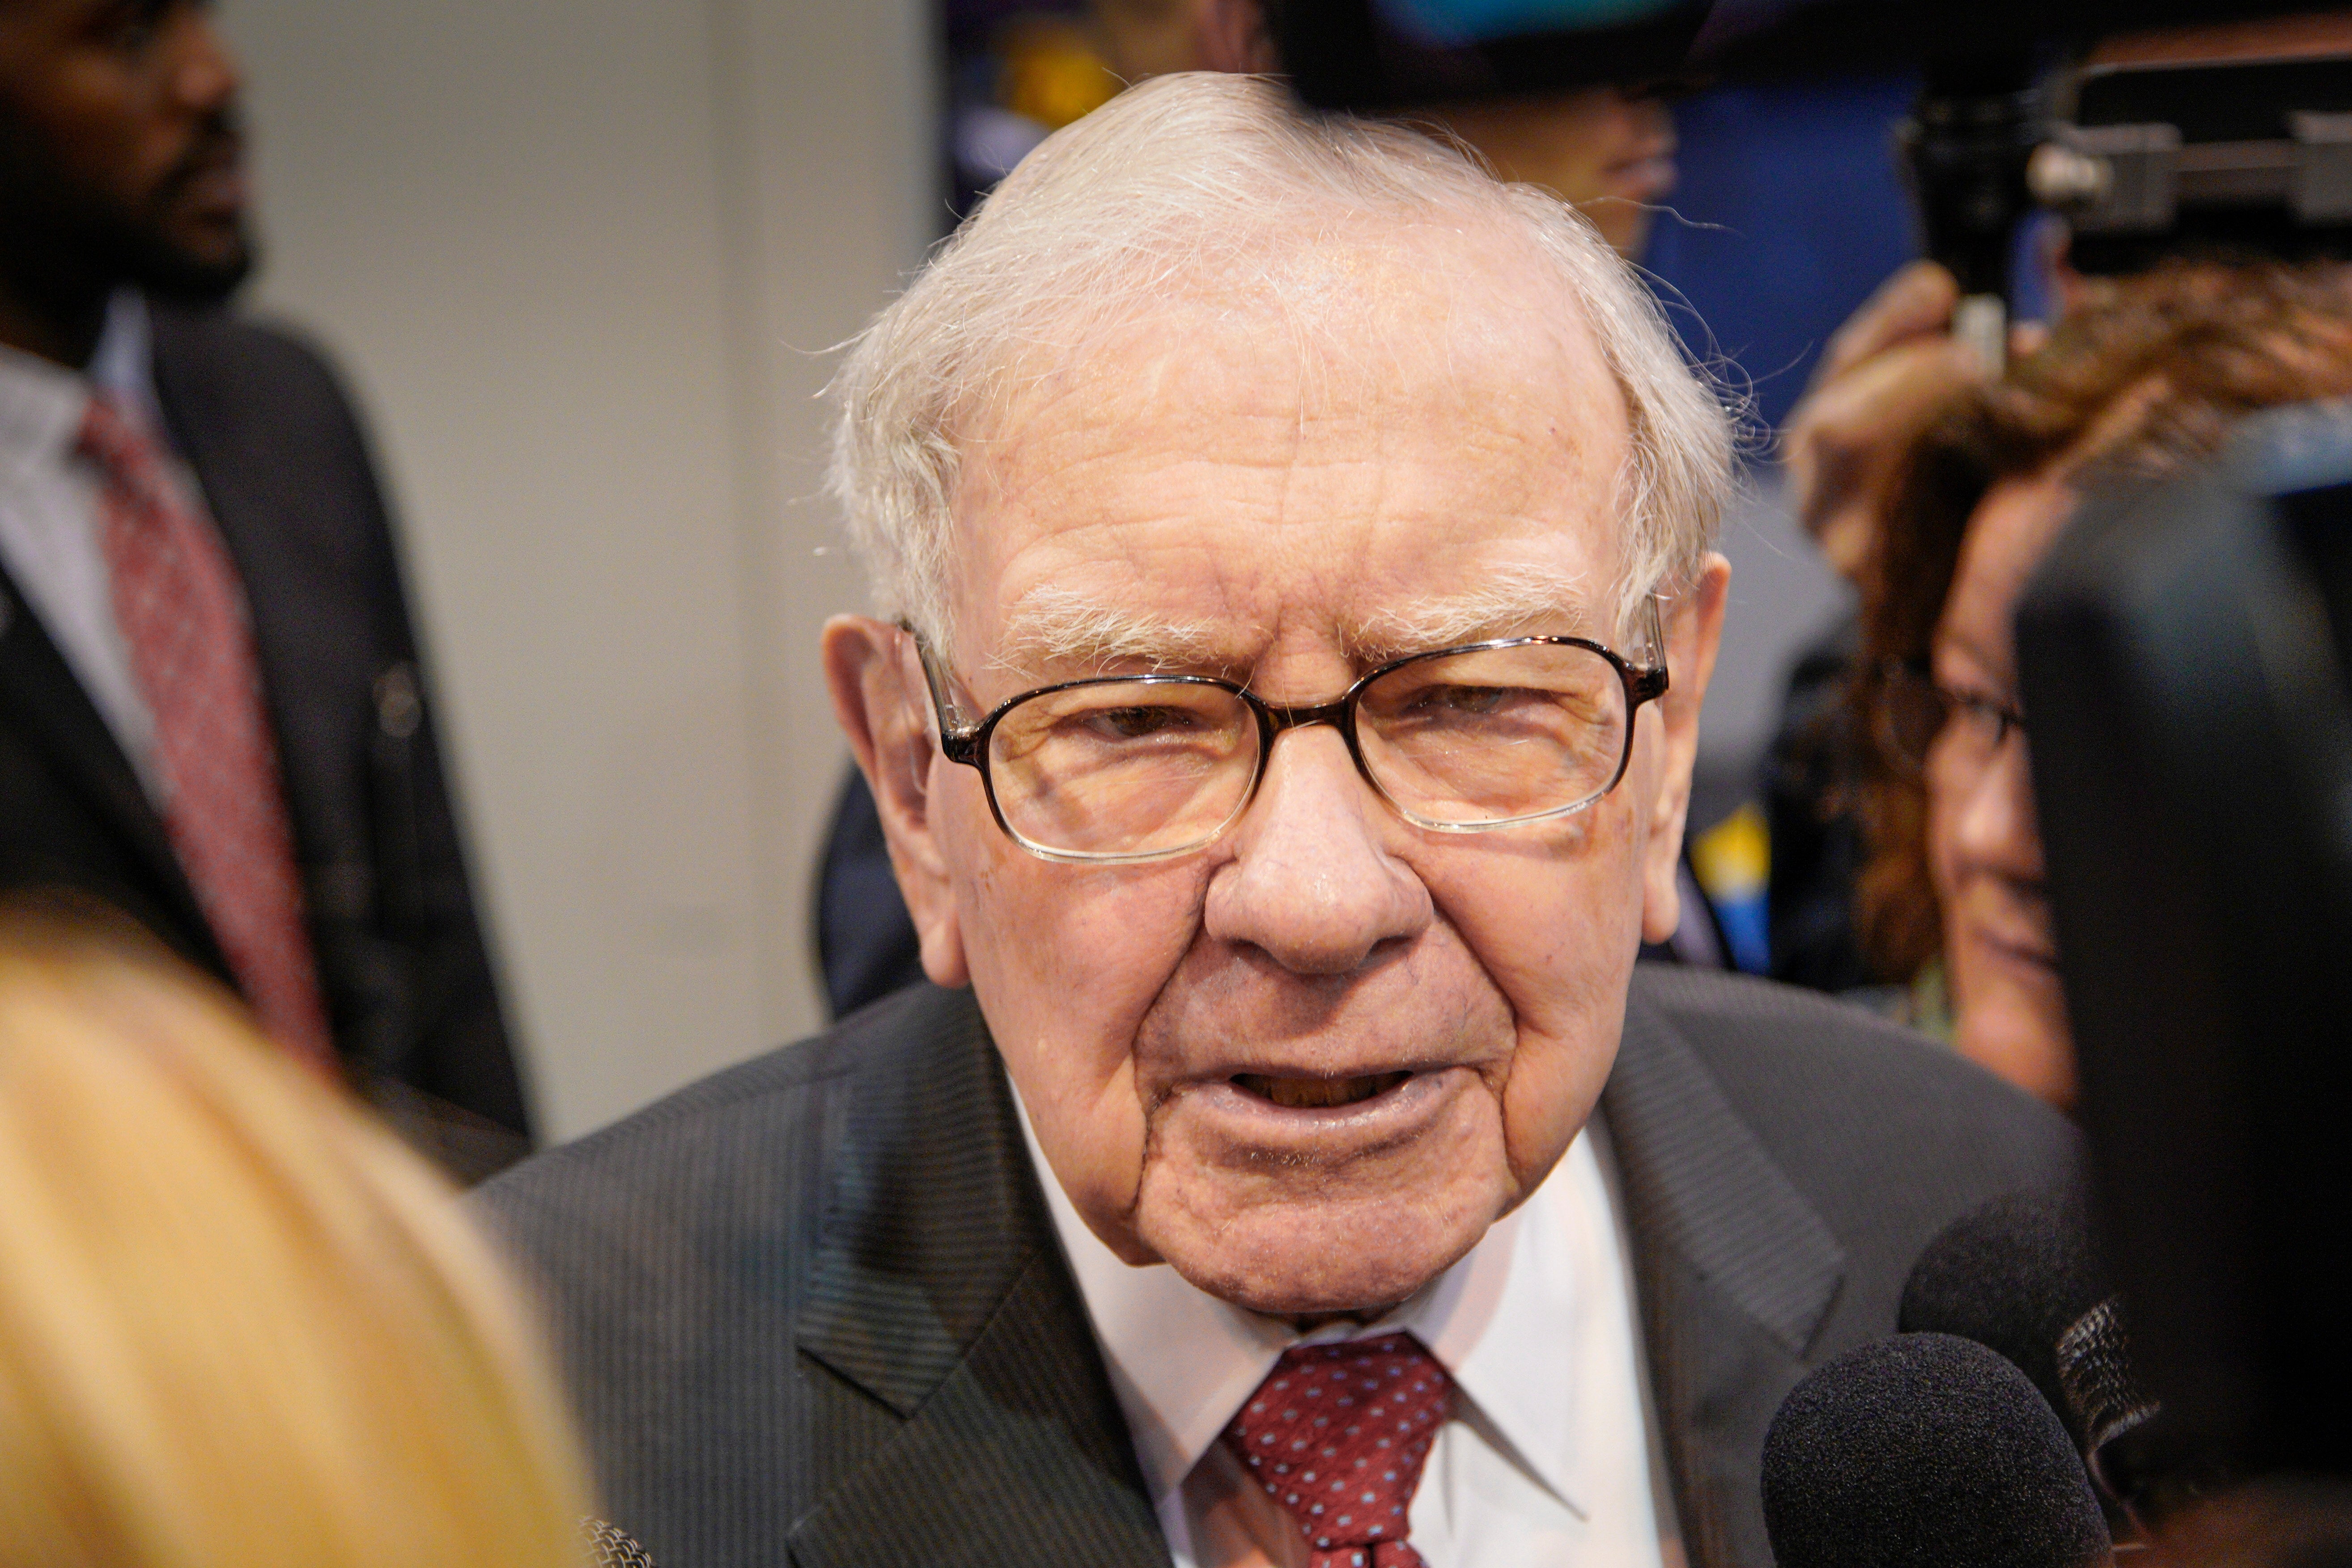 A collection of the insights Warren Buffett offered in his annual